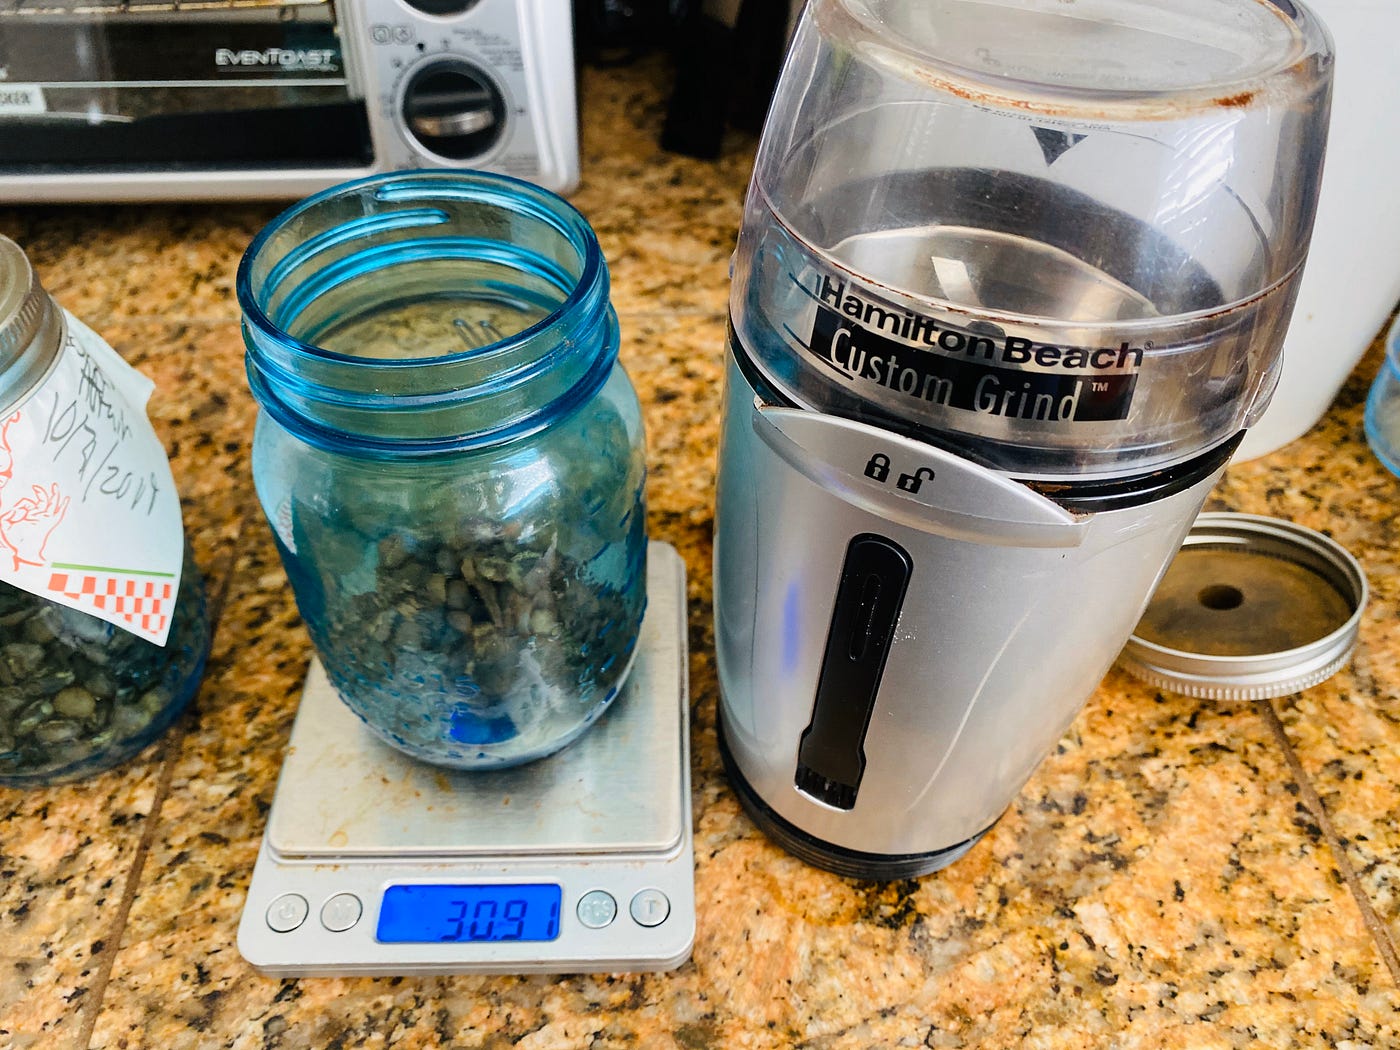 The Blade Coffee Grinder Guide: Use the Blade Grinder with Confidence